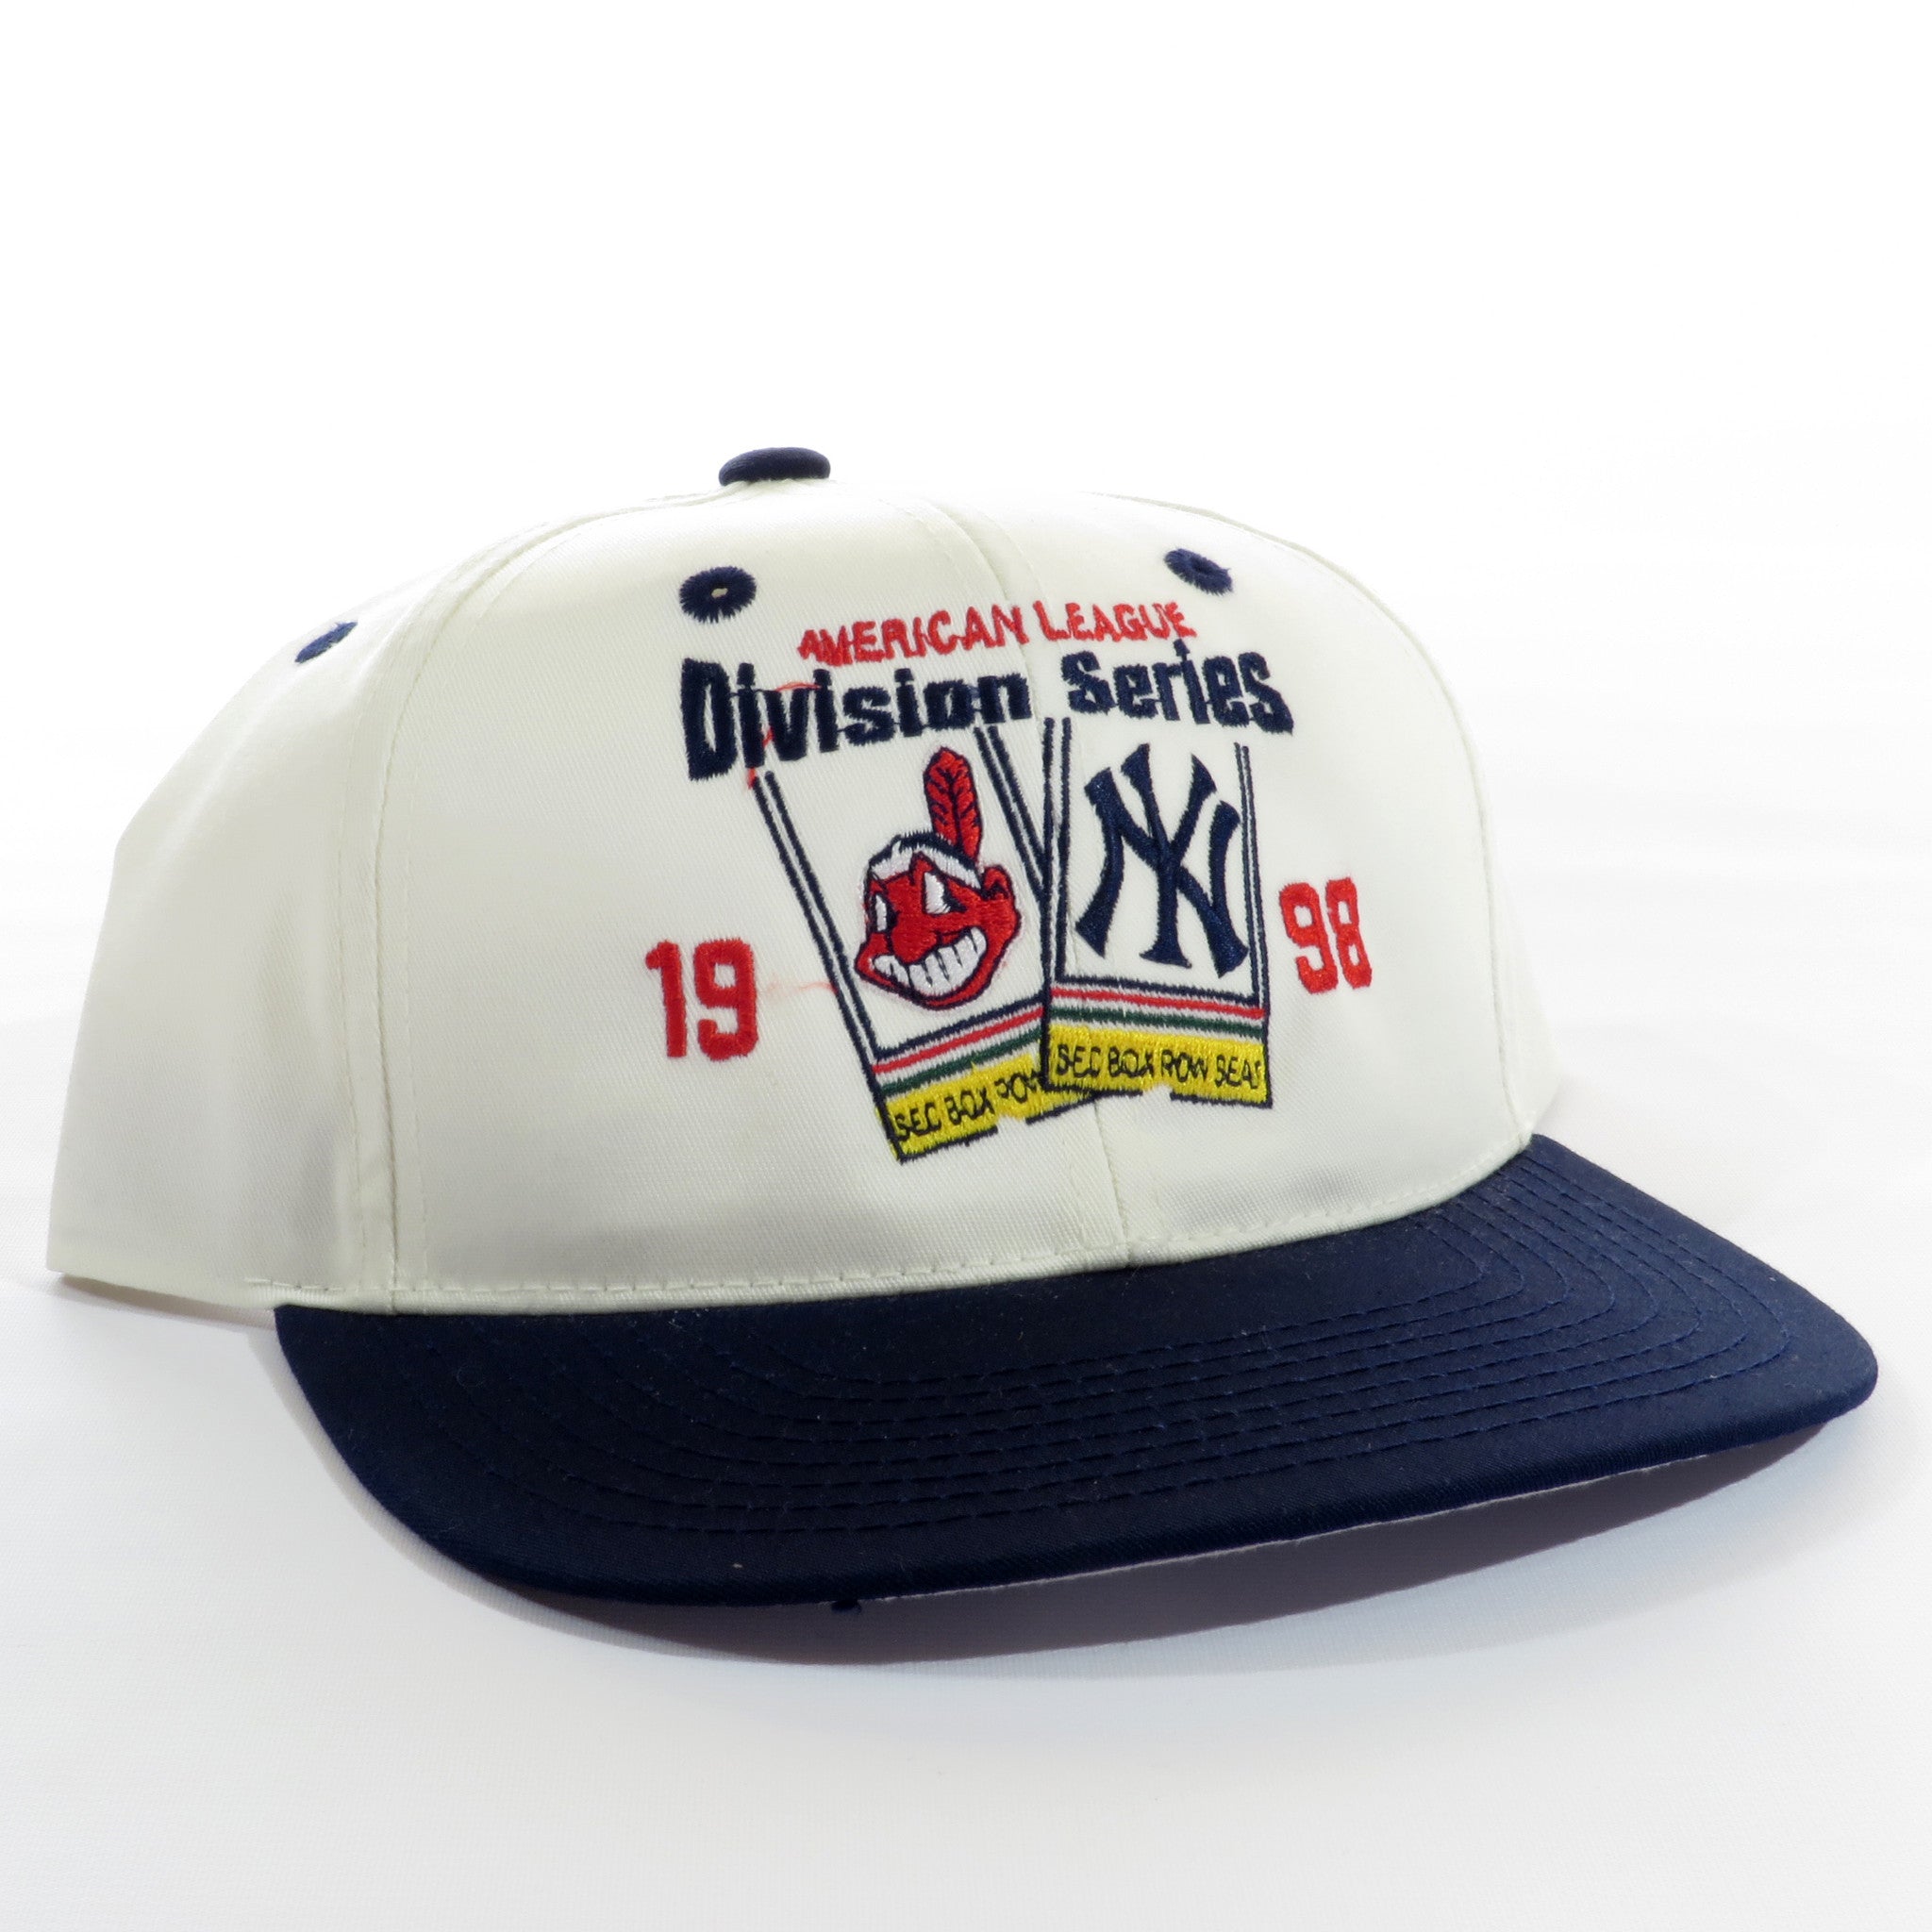 1998 American League Division Series Snapback Hat